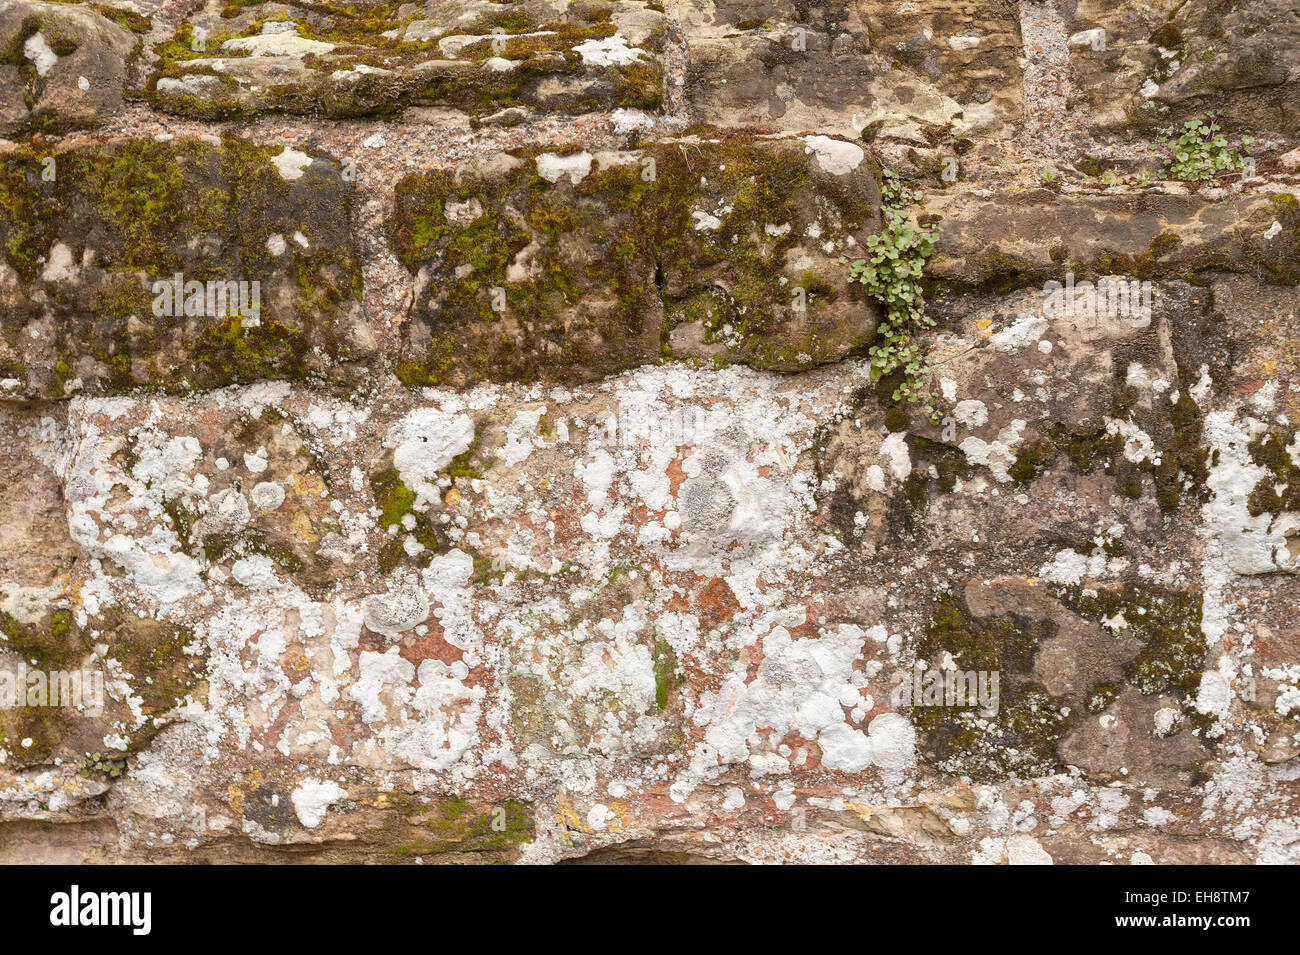 medieval wall of castle coated with patches of lichen and moss showing signs of deterioration building blocks Stock Photo